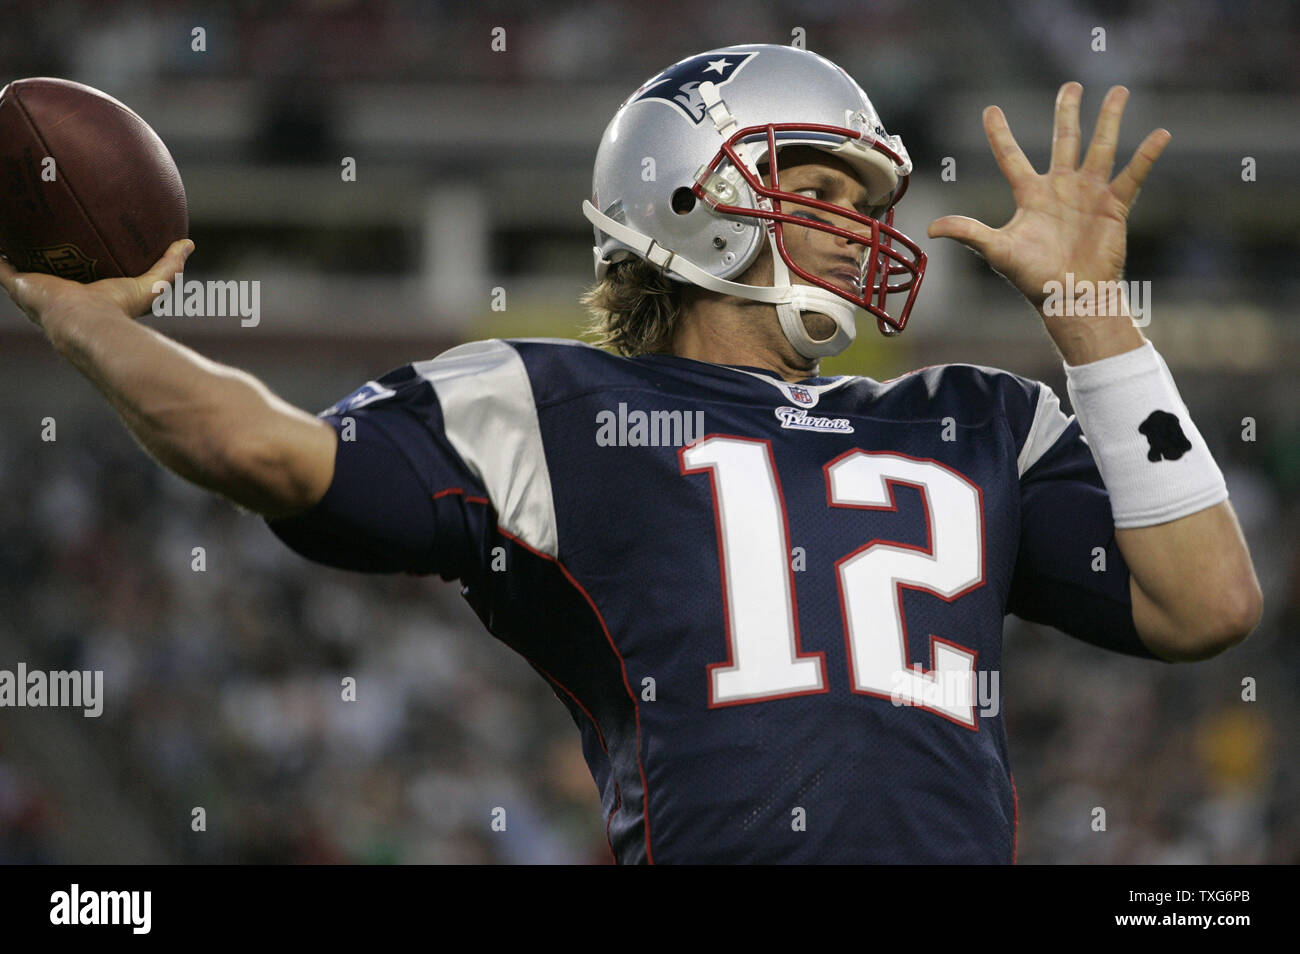 New England Patriots quarterback Tom Brady warms up his arm during a timeout in the first quarter of preseason action against the New Orleans Saints at Gillette Stadium in Foxboro, Massachusetts on August 12, 2010.      UPI/Matthew Healey Stock Photo